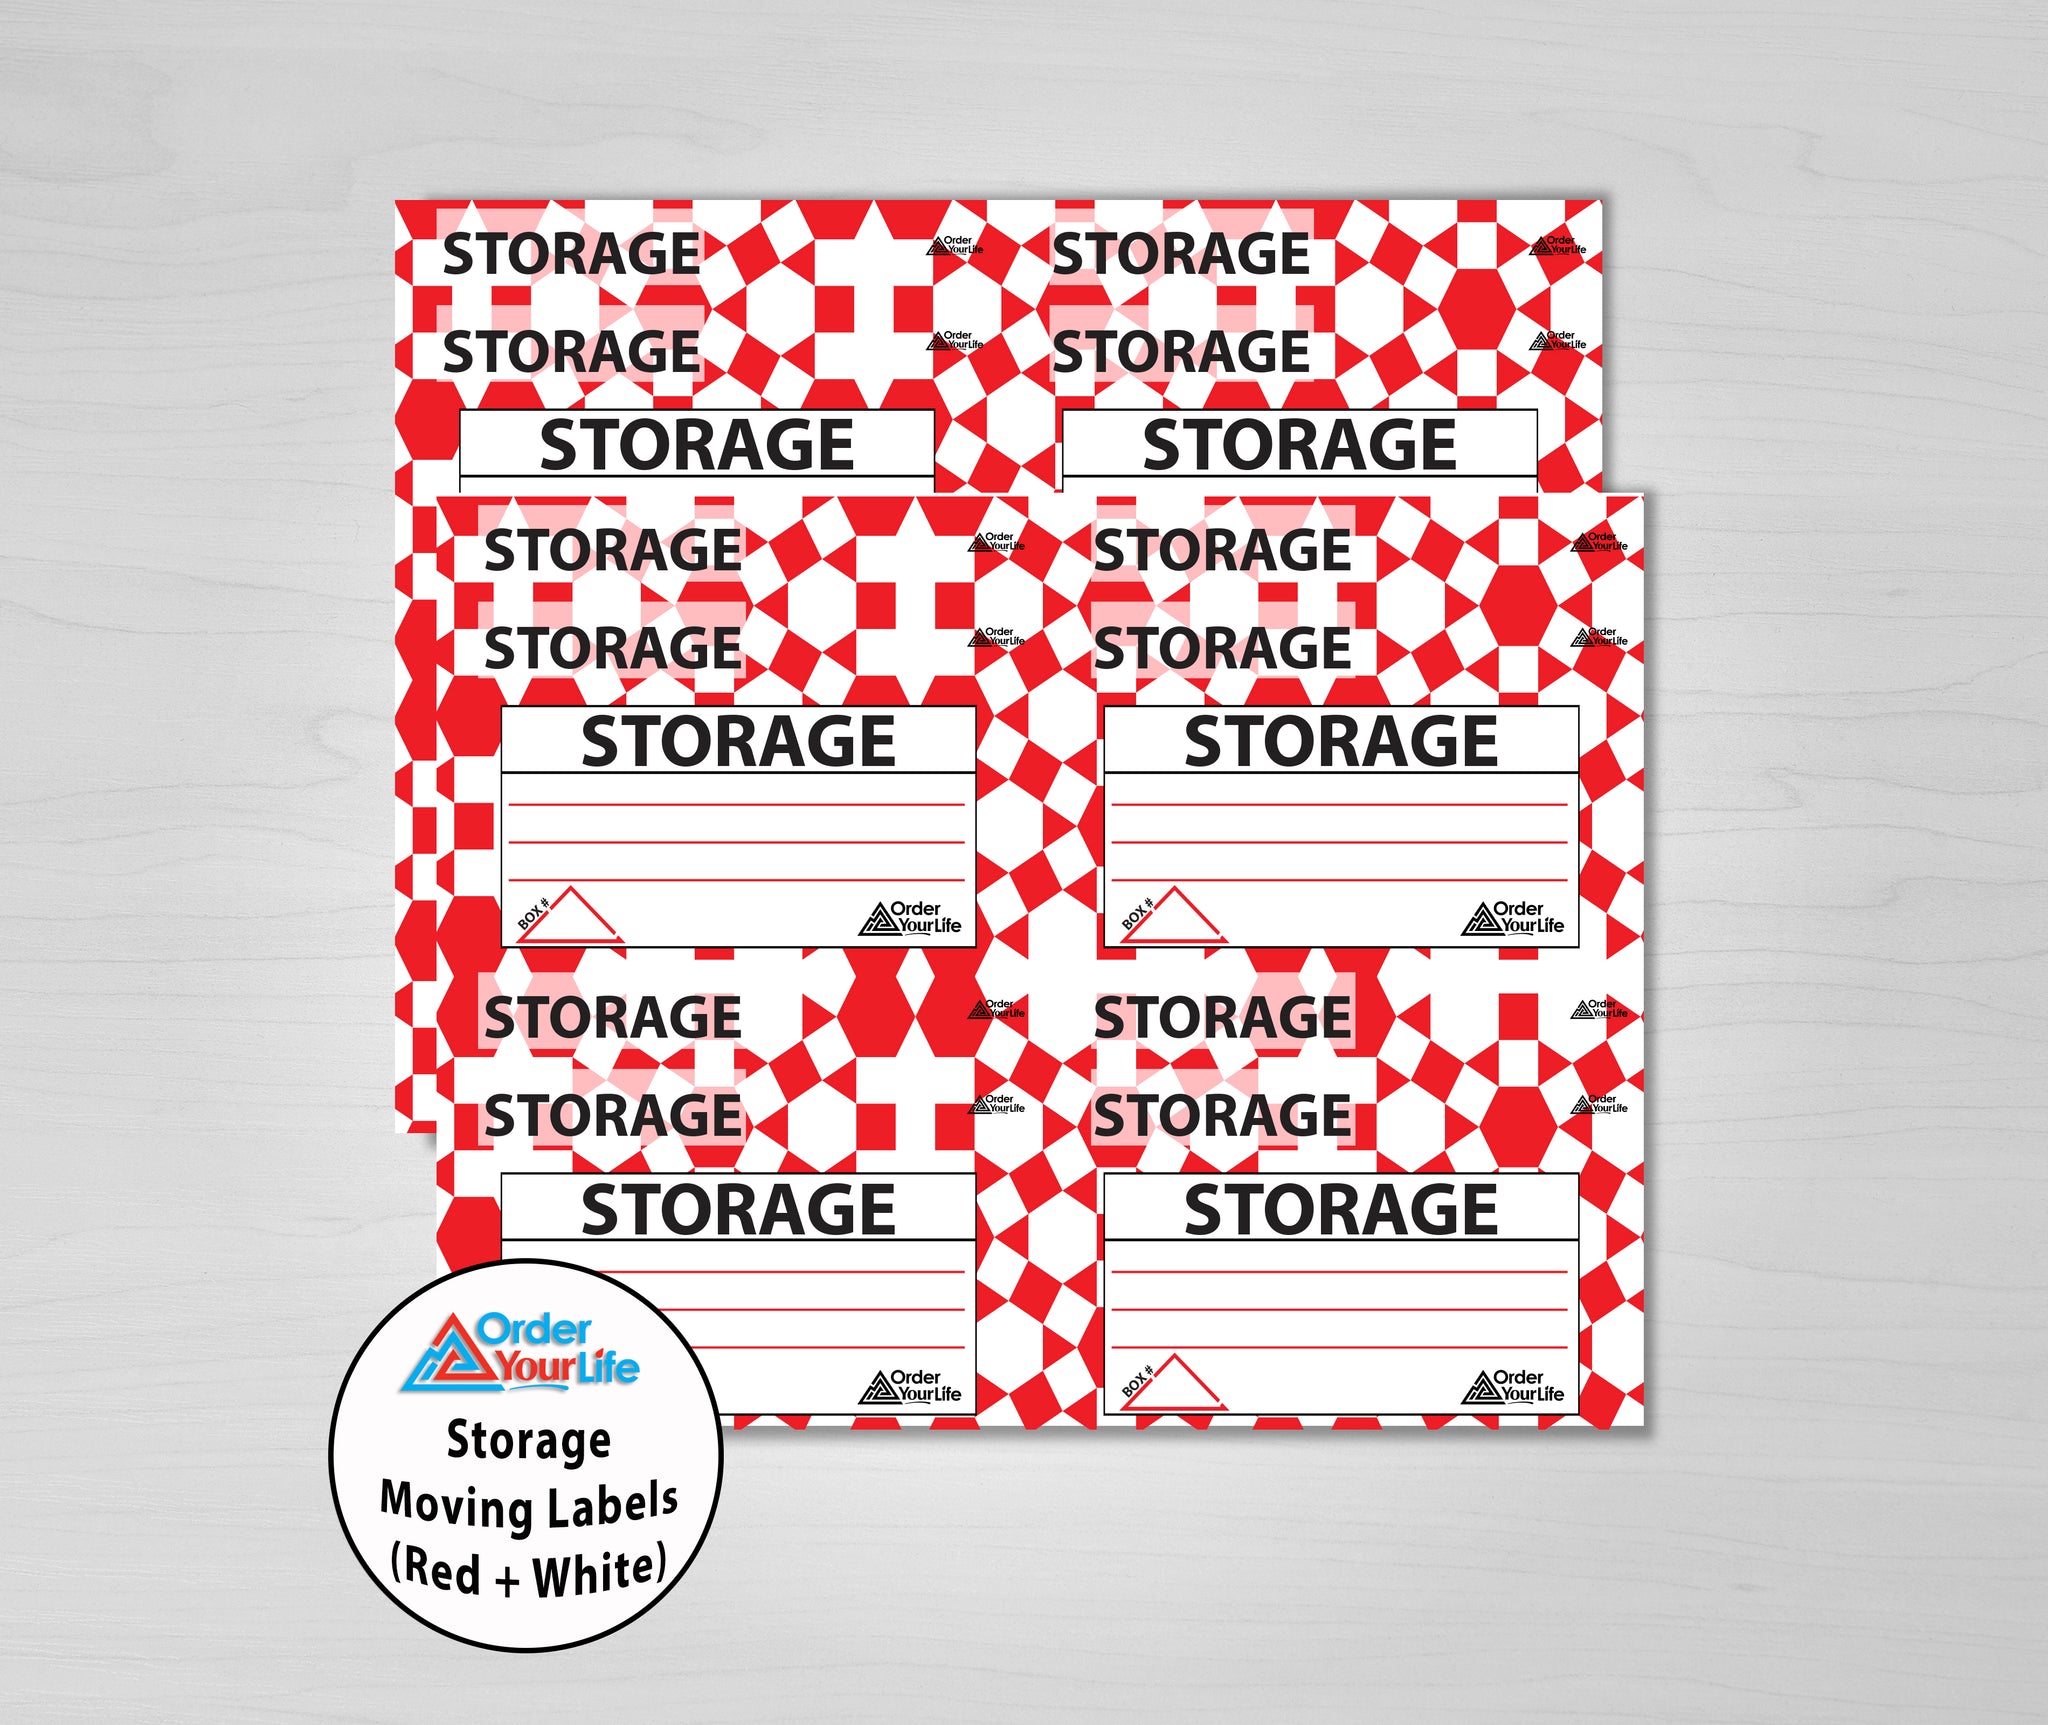 Storage Moving Labels (Red + White)